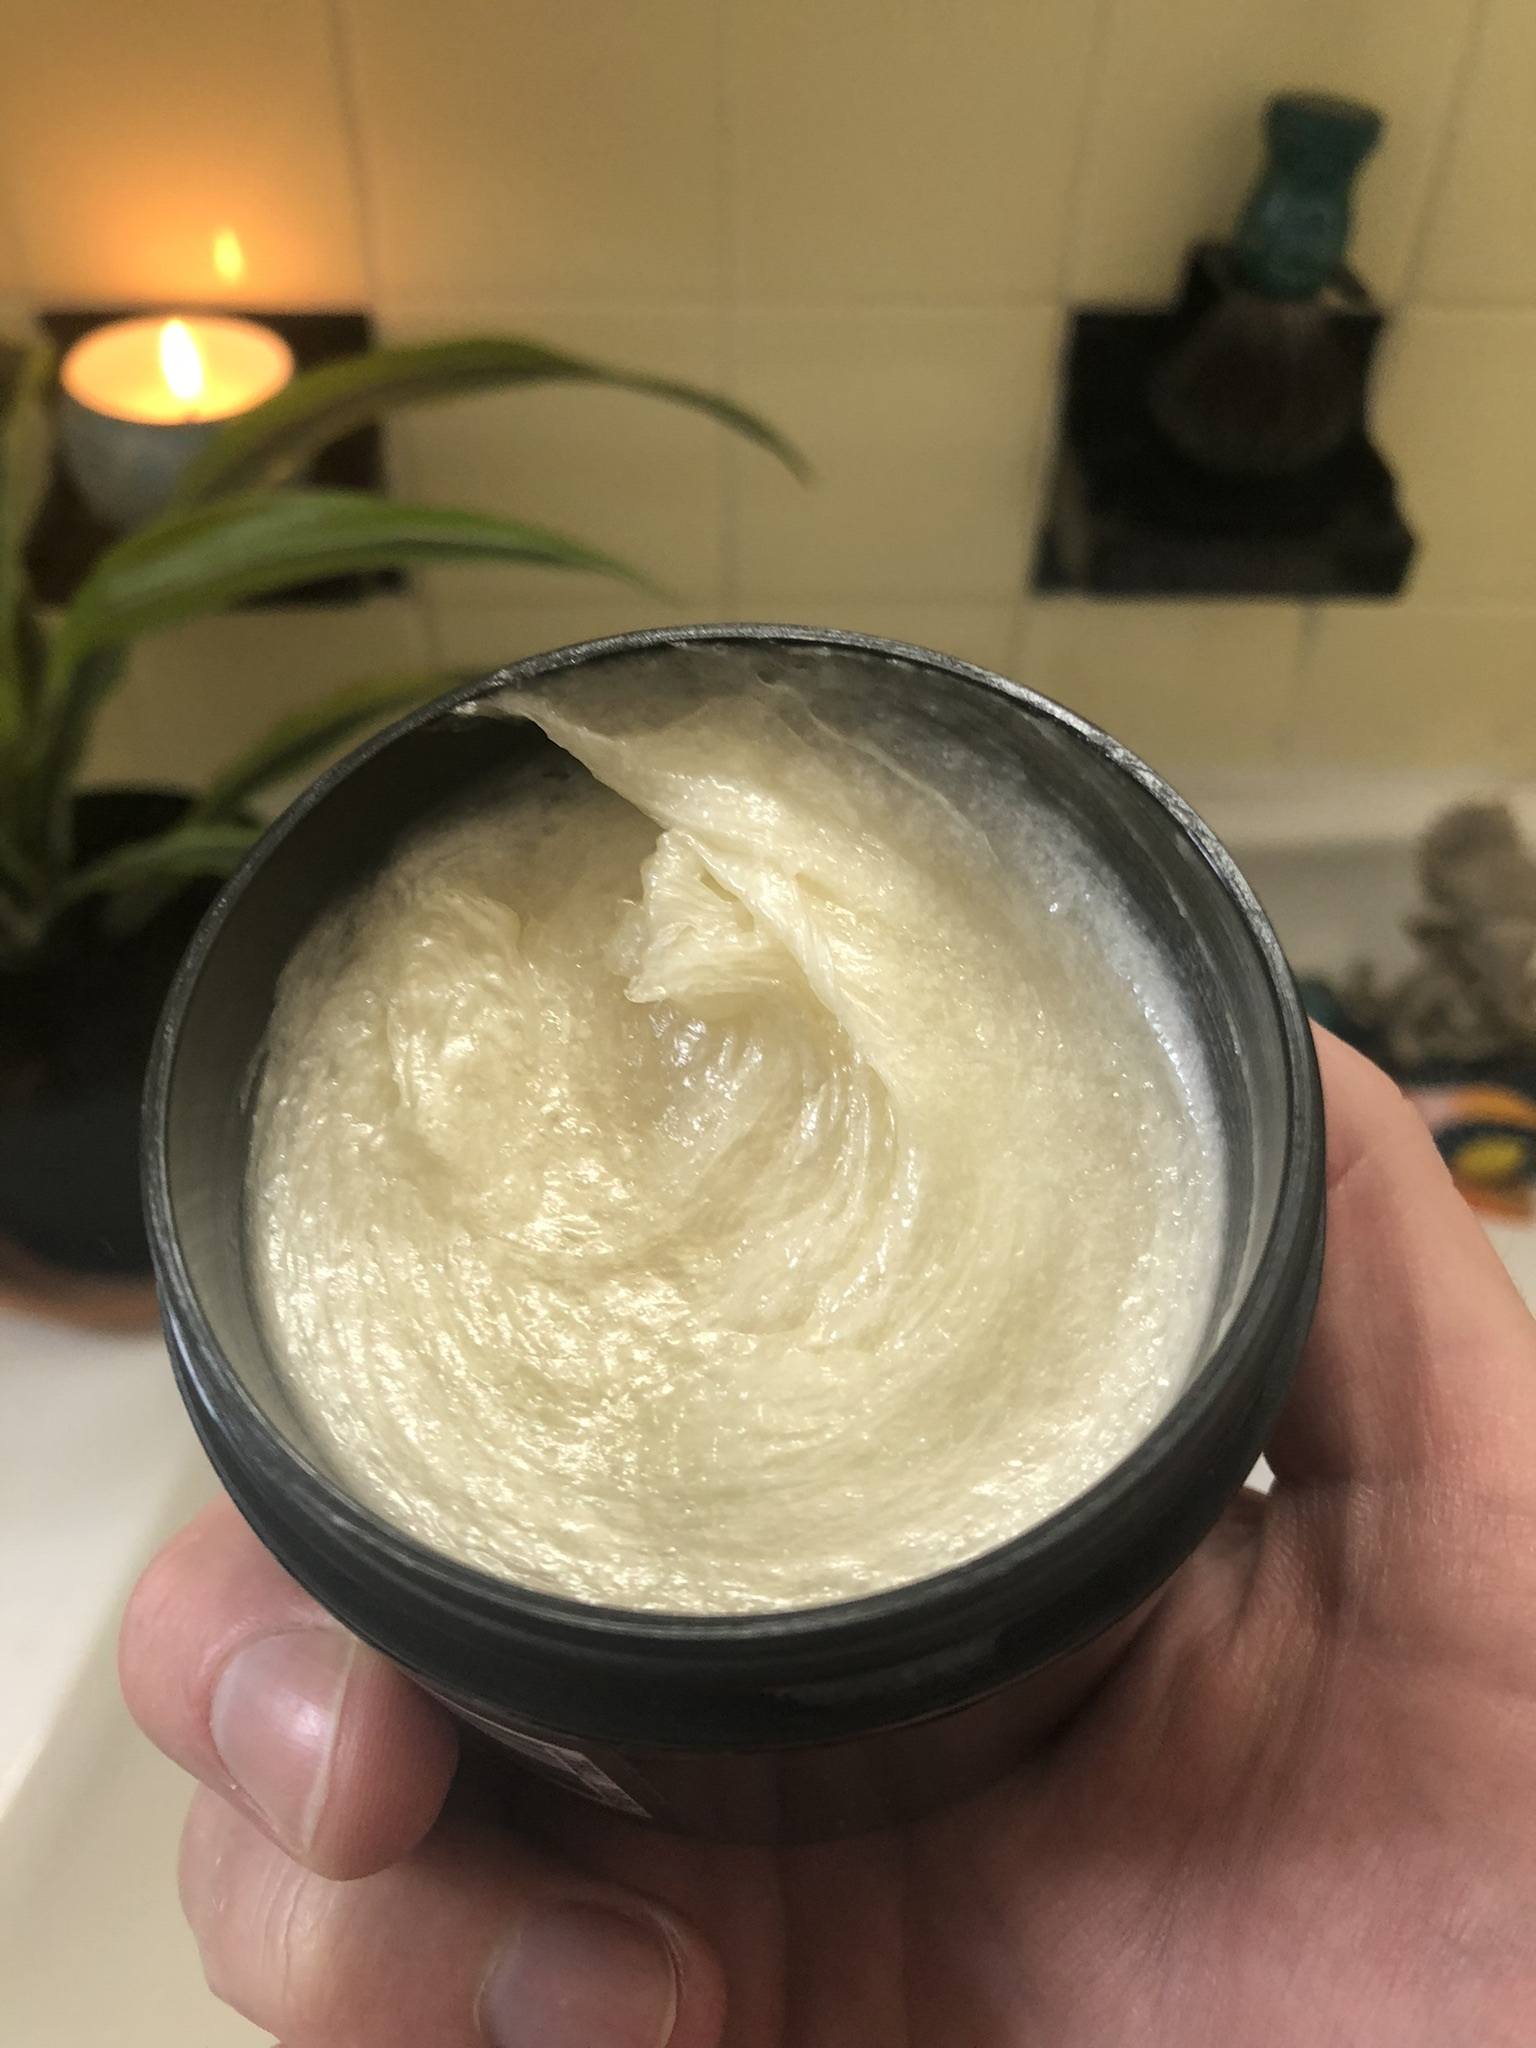 Taconic Shaving Cream Review - Sheen and Lather